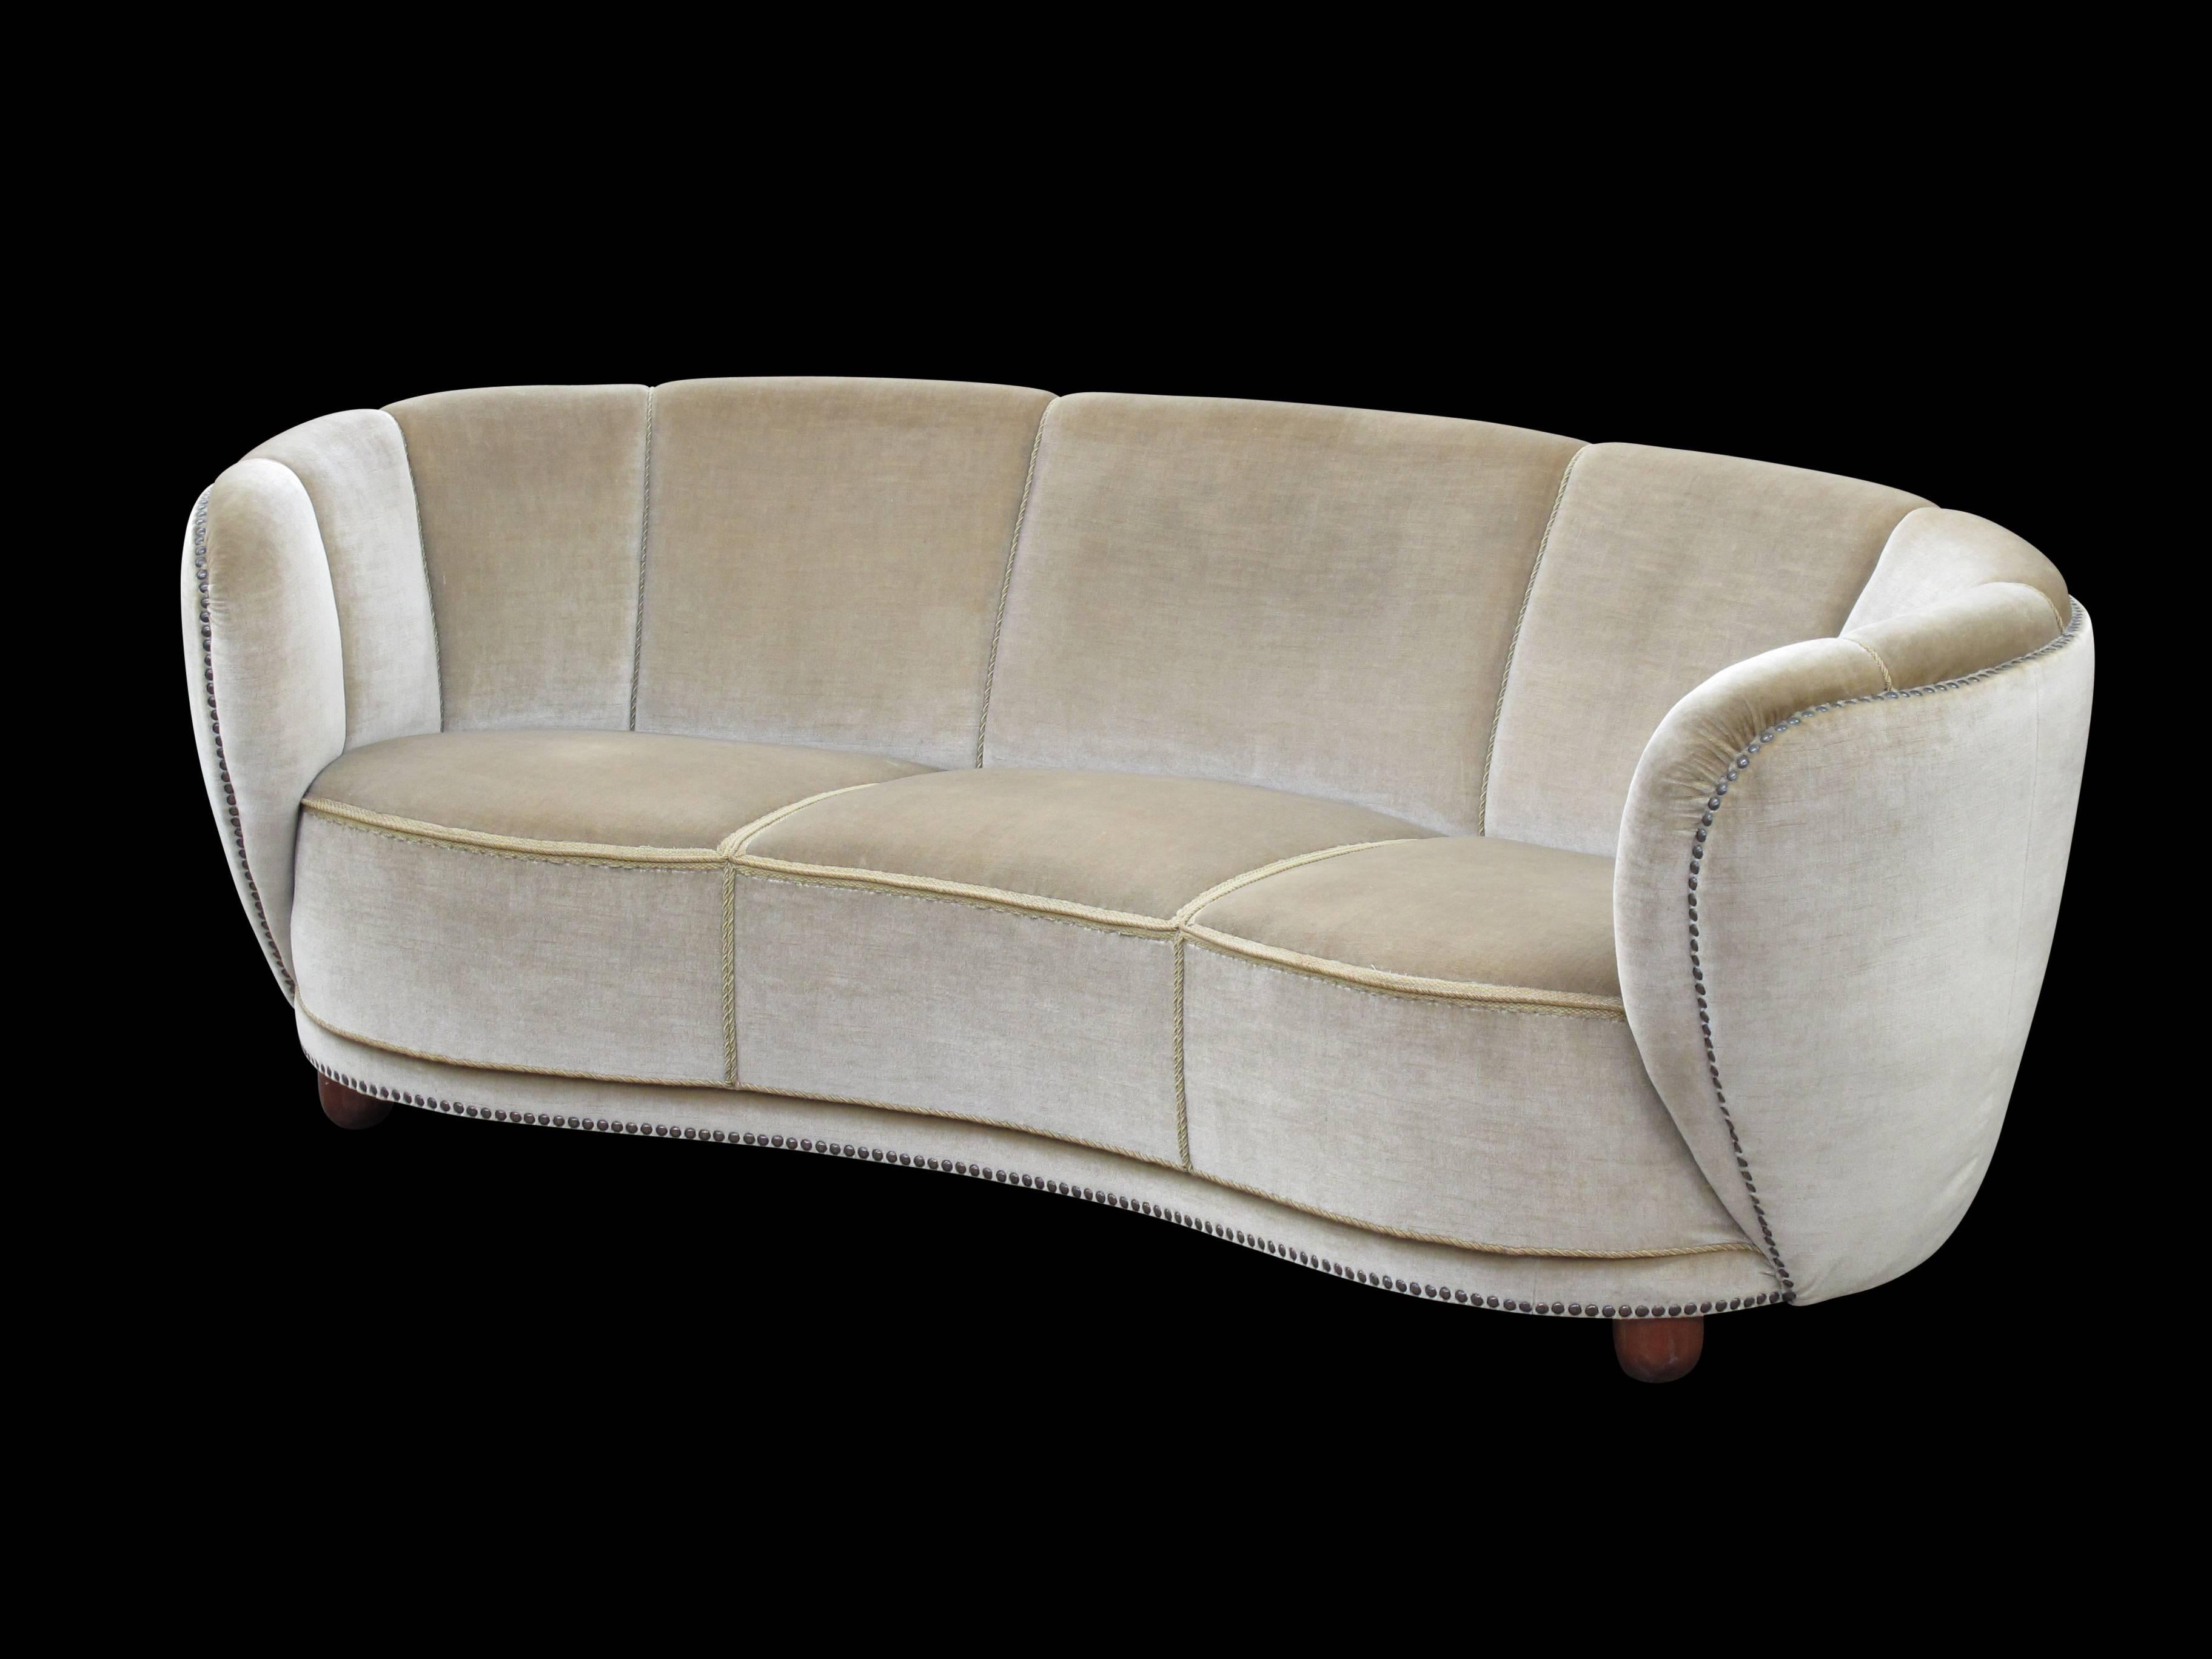 Early 1930s curved back sofa in the original mohair fabric with brass tacks along outer edge, eight-way hand tied springs on solid constructed frame. Excellent original condition.